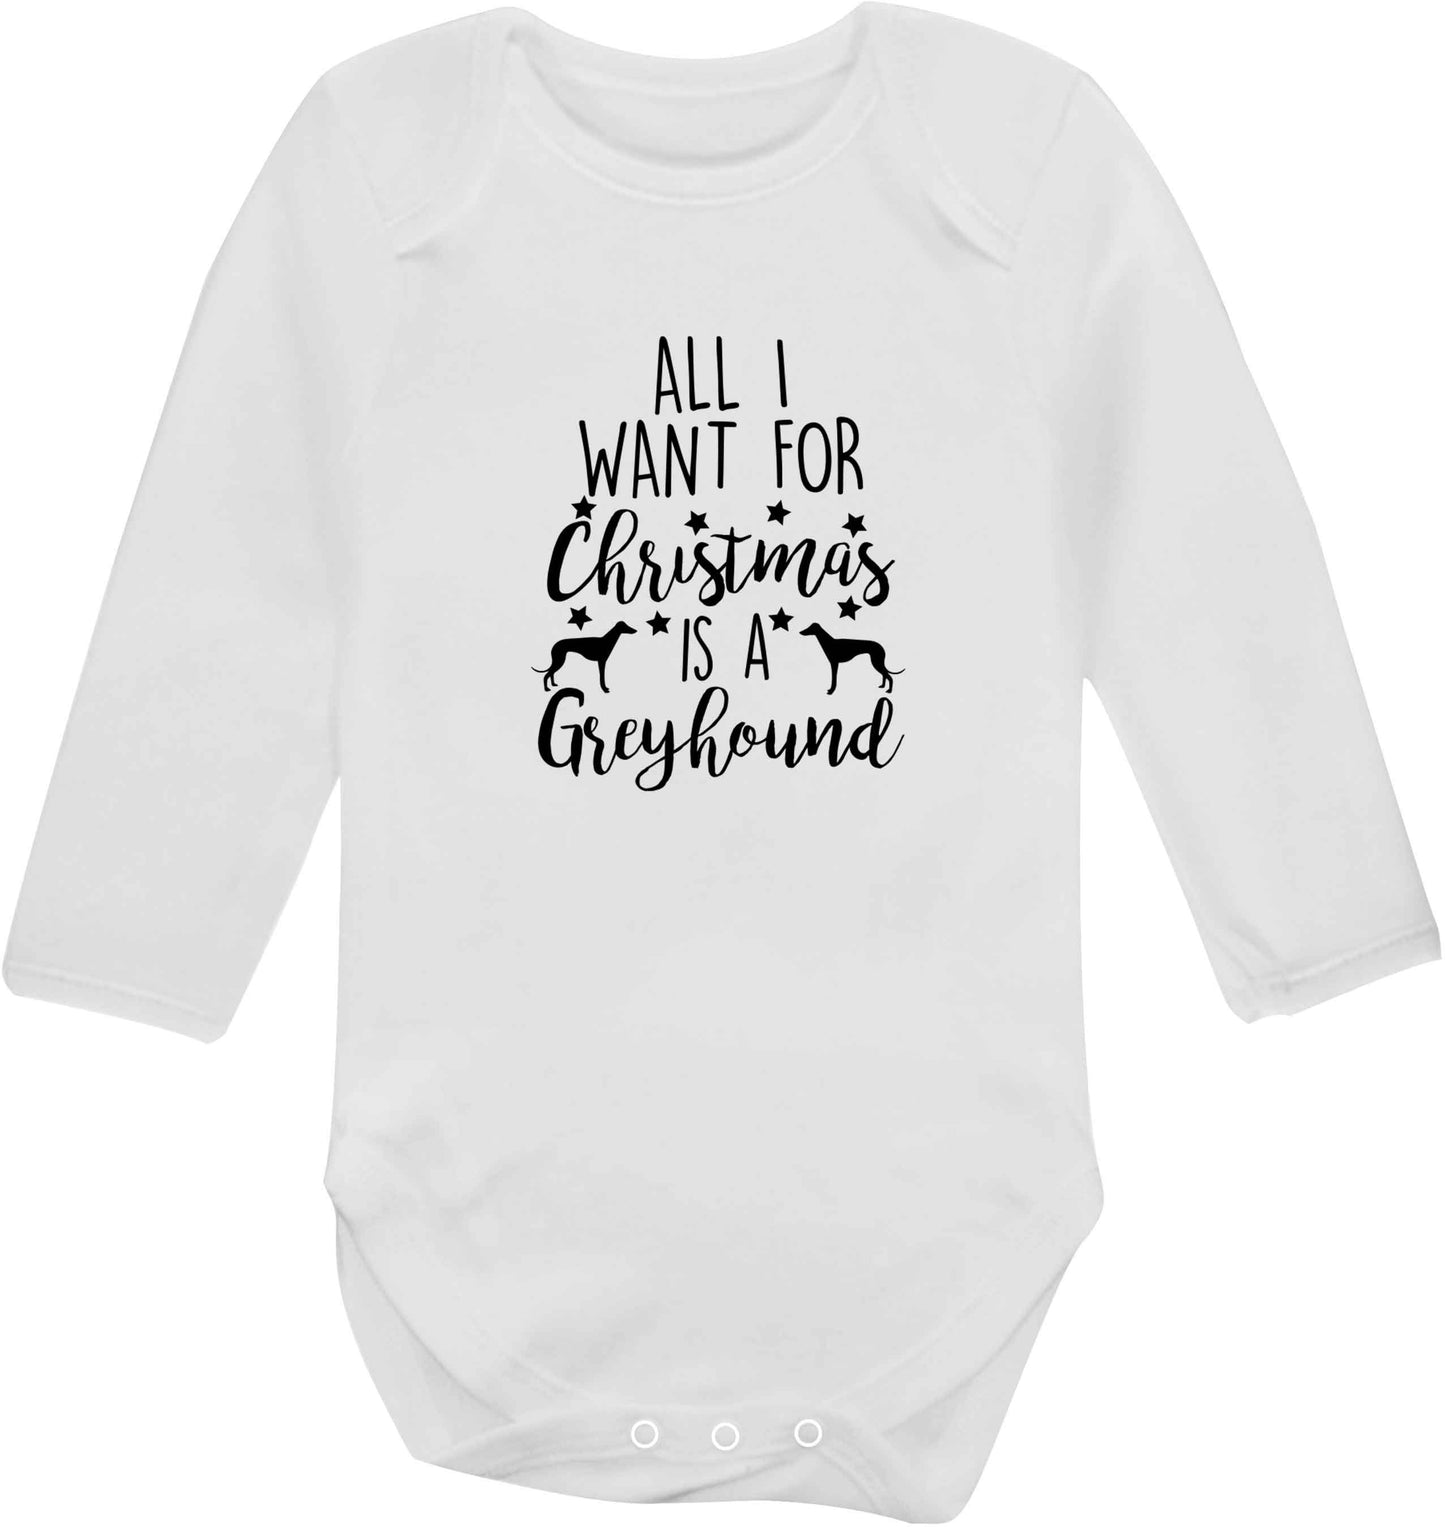 All I want for Christmas is a greyhound baby vest long sleeved white 6-12 months